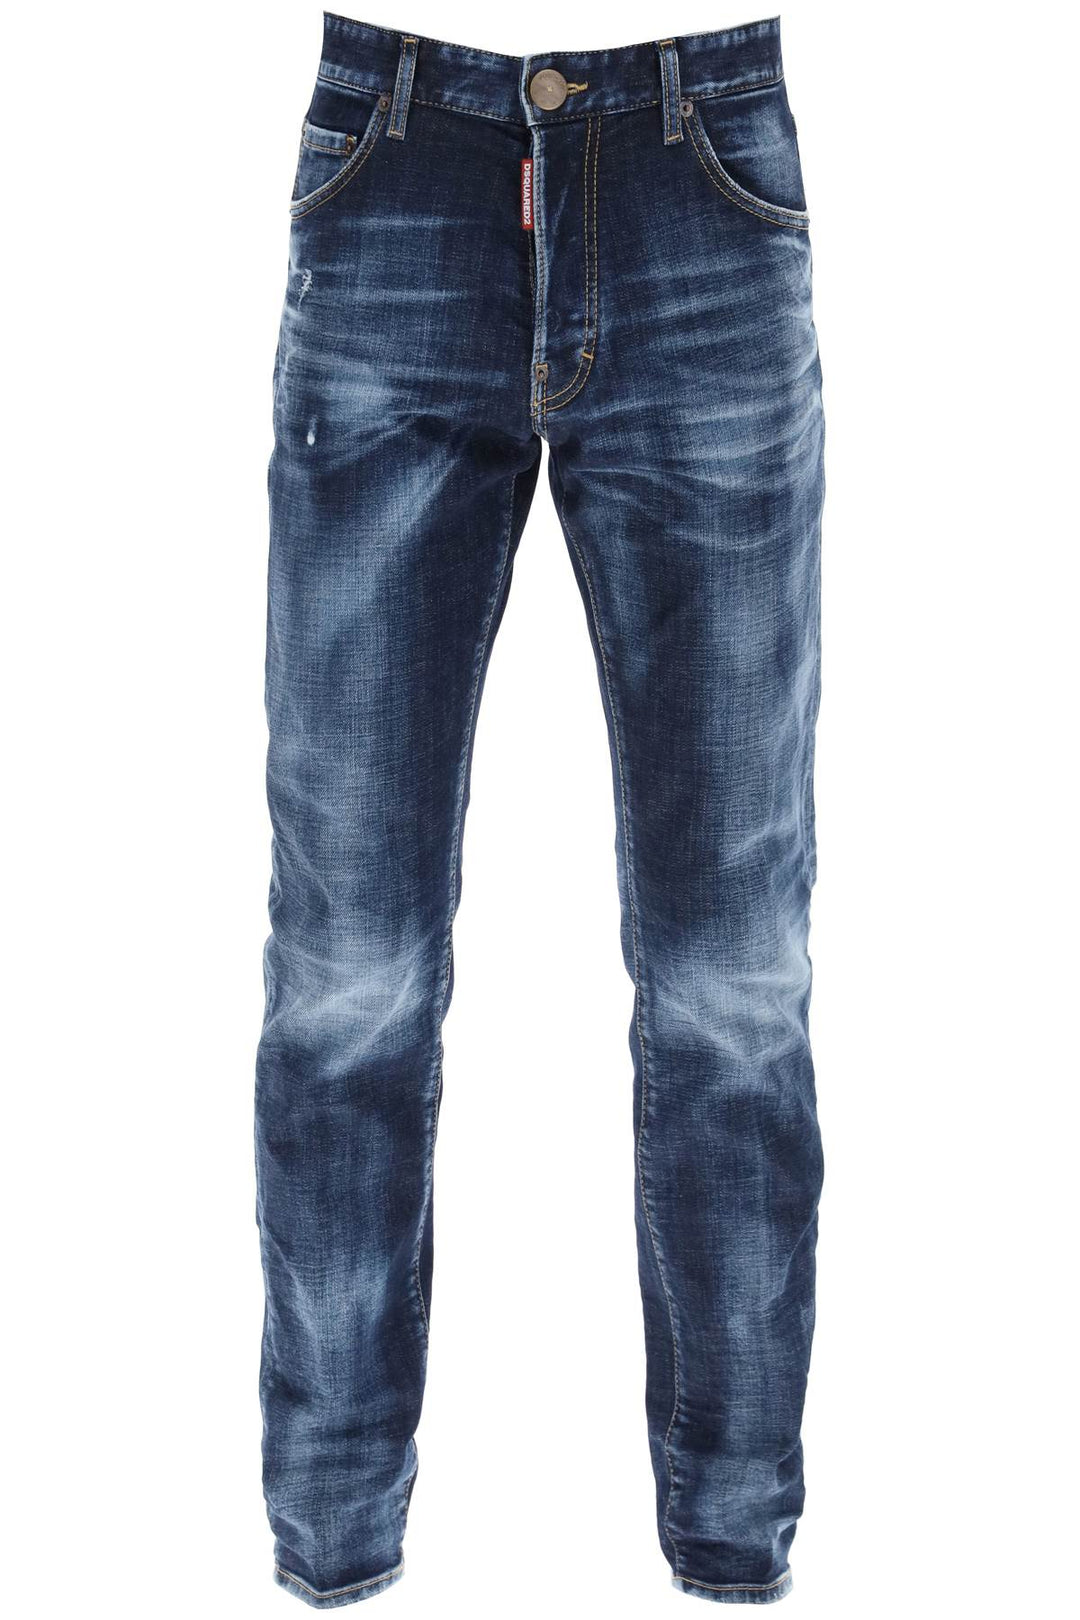 Jeans Cool Guy Dark Clean Wash - Dsquared2 - Uomo